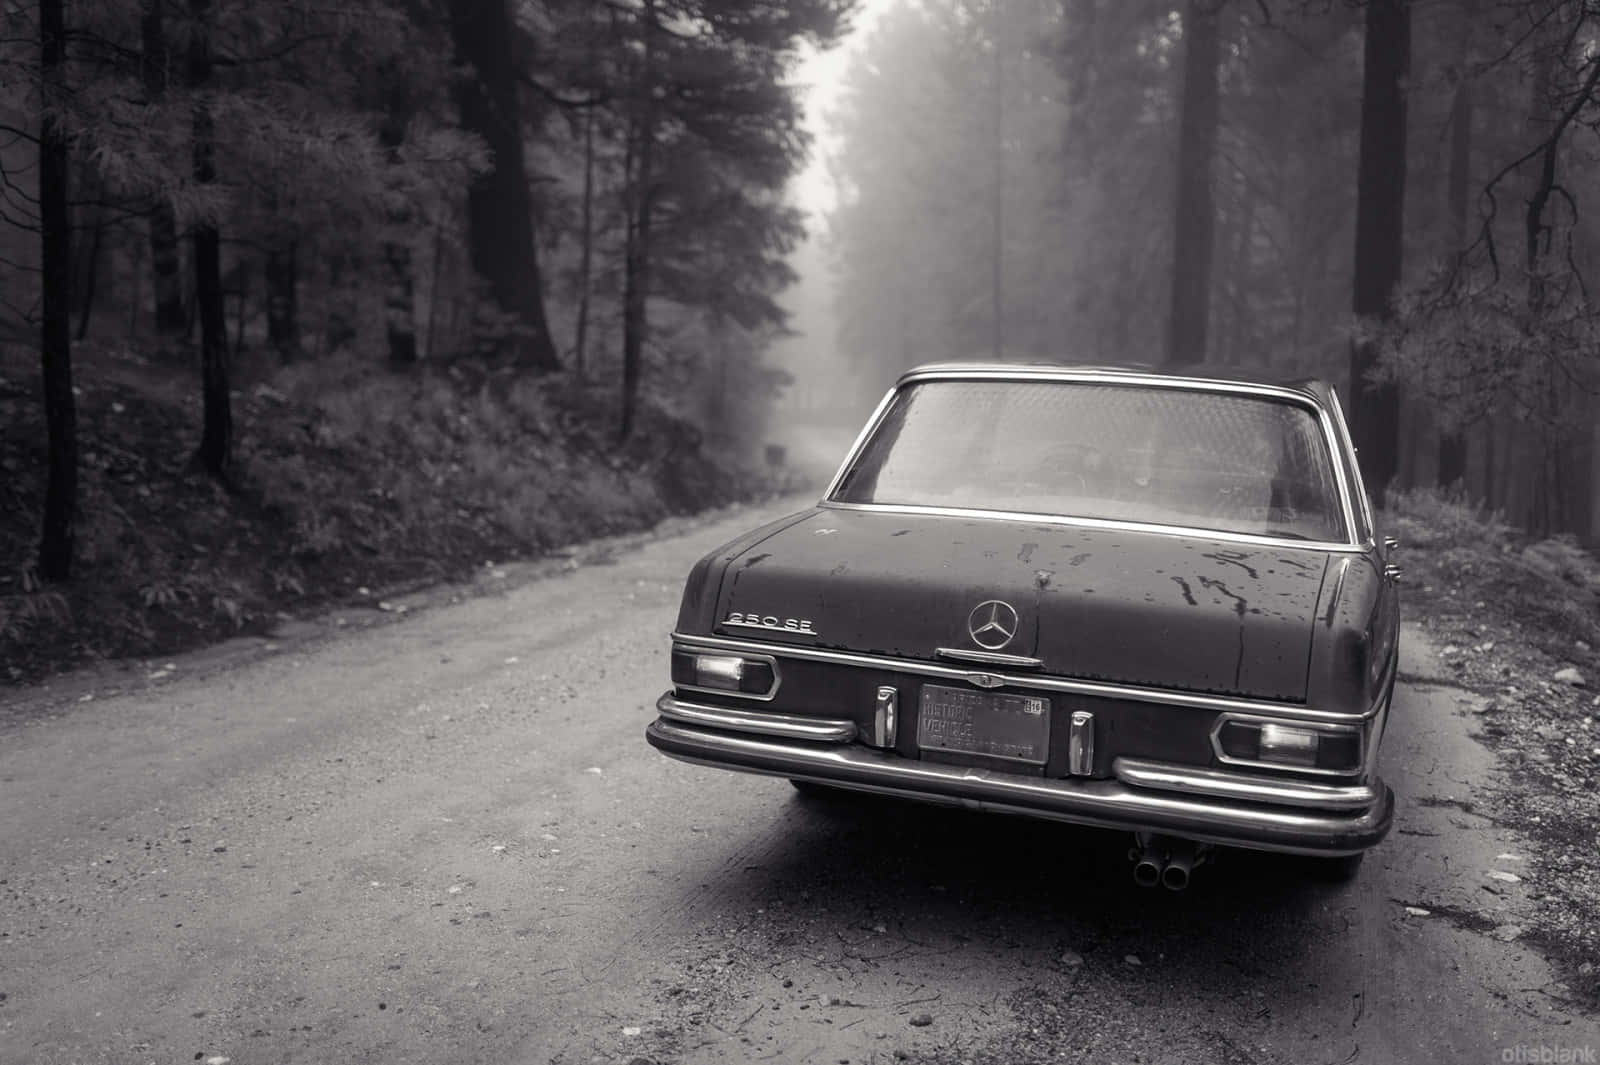 Classic Elegance of a Black and White Vintage Car Wallpaper